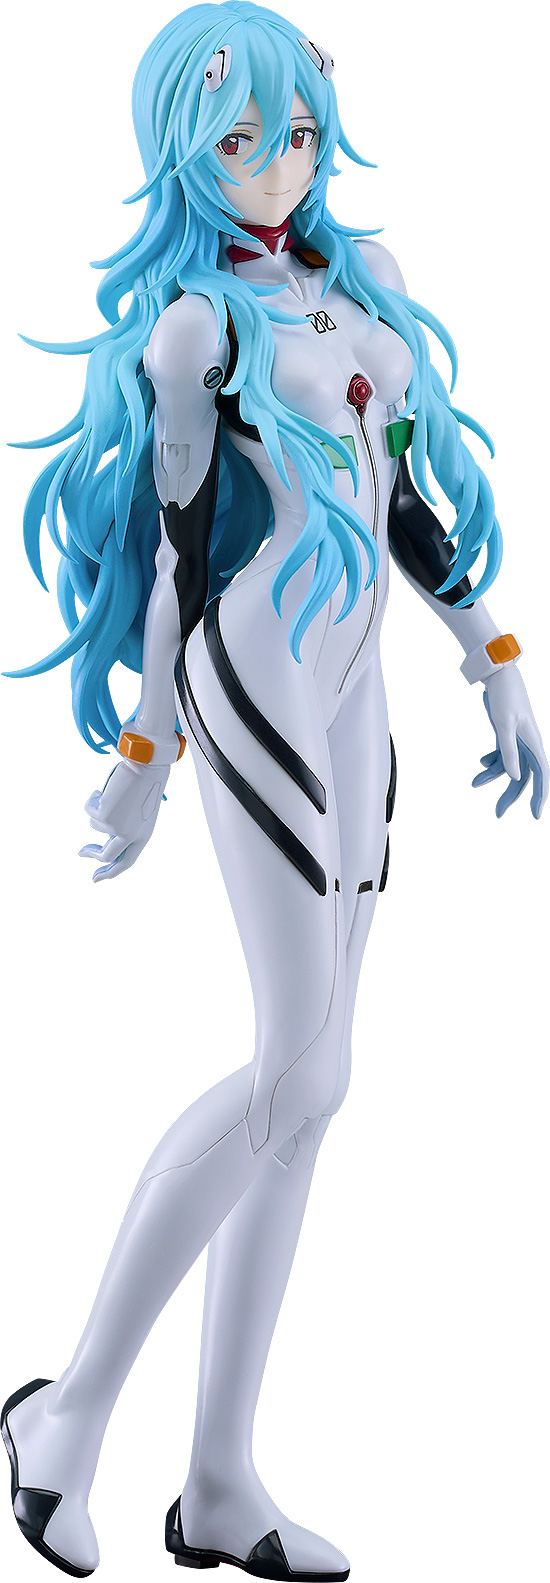 Evangelion: 3.0+1.0 Thrice Upon a Time PLAMAX Ayanami Rei Long Hair Ver. Max Factory